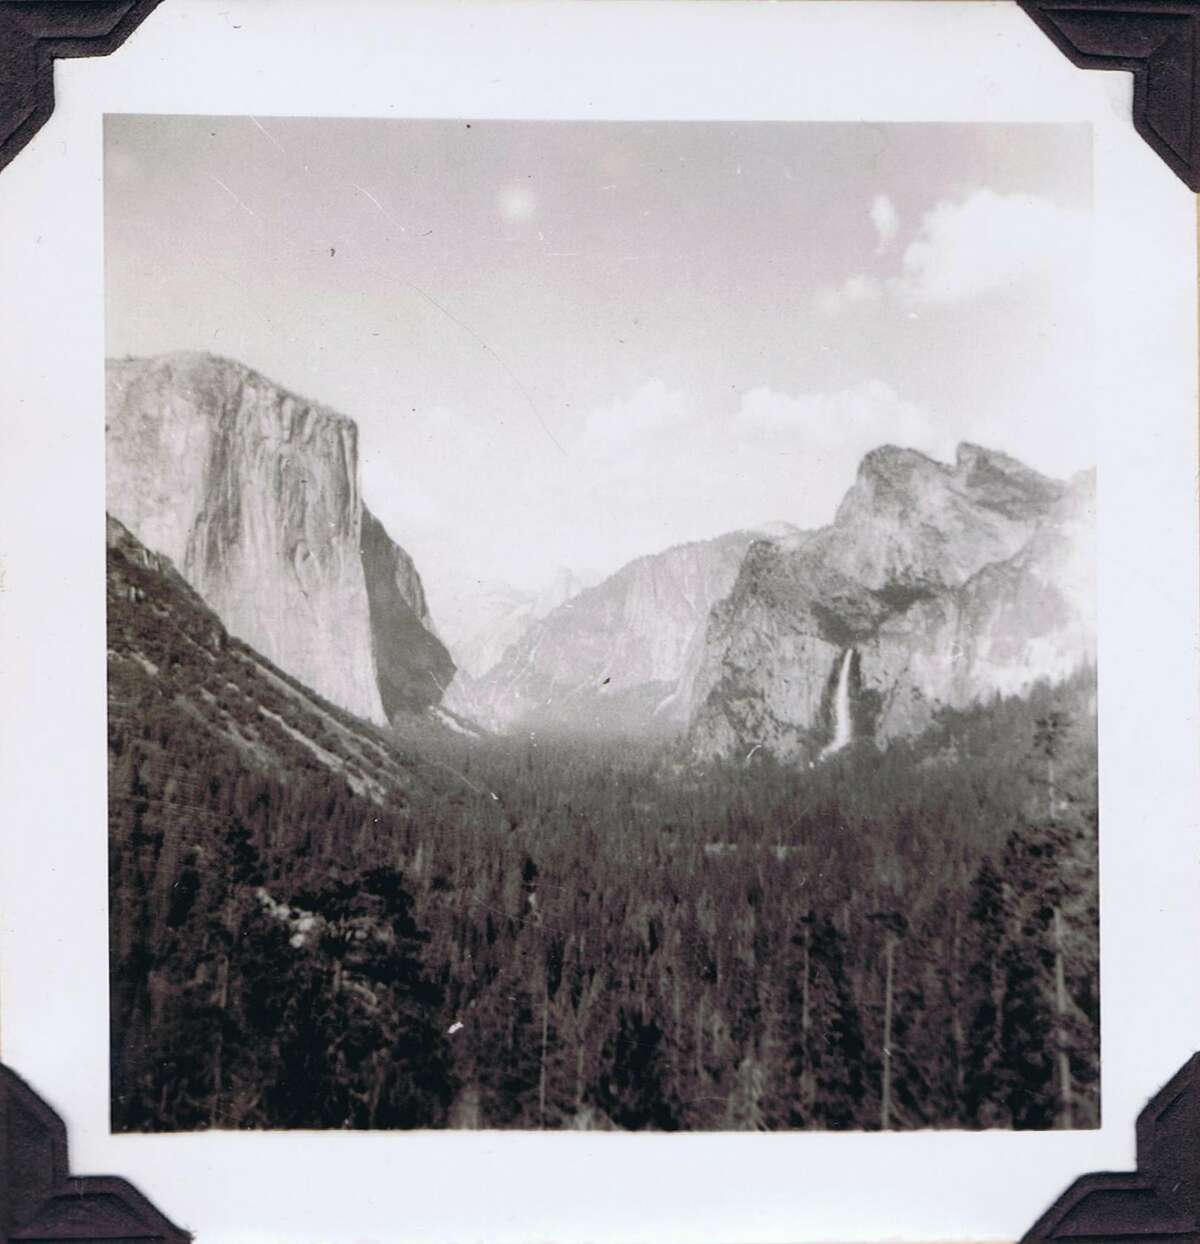 A Look At Yosemite National Park About 100 Years Ago